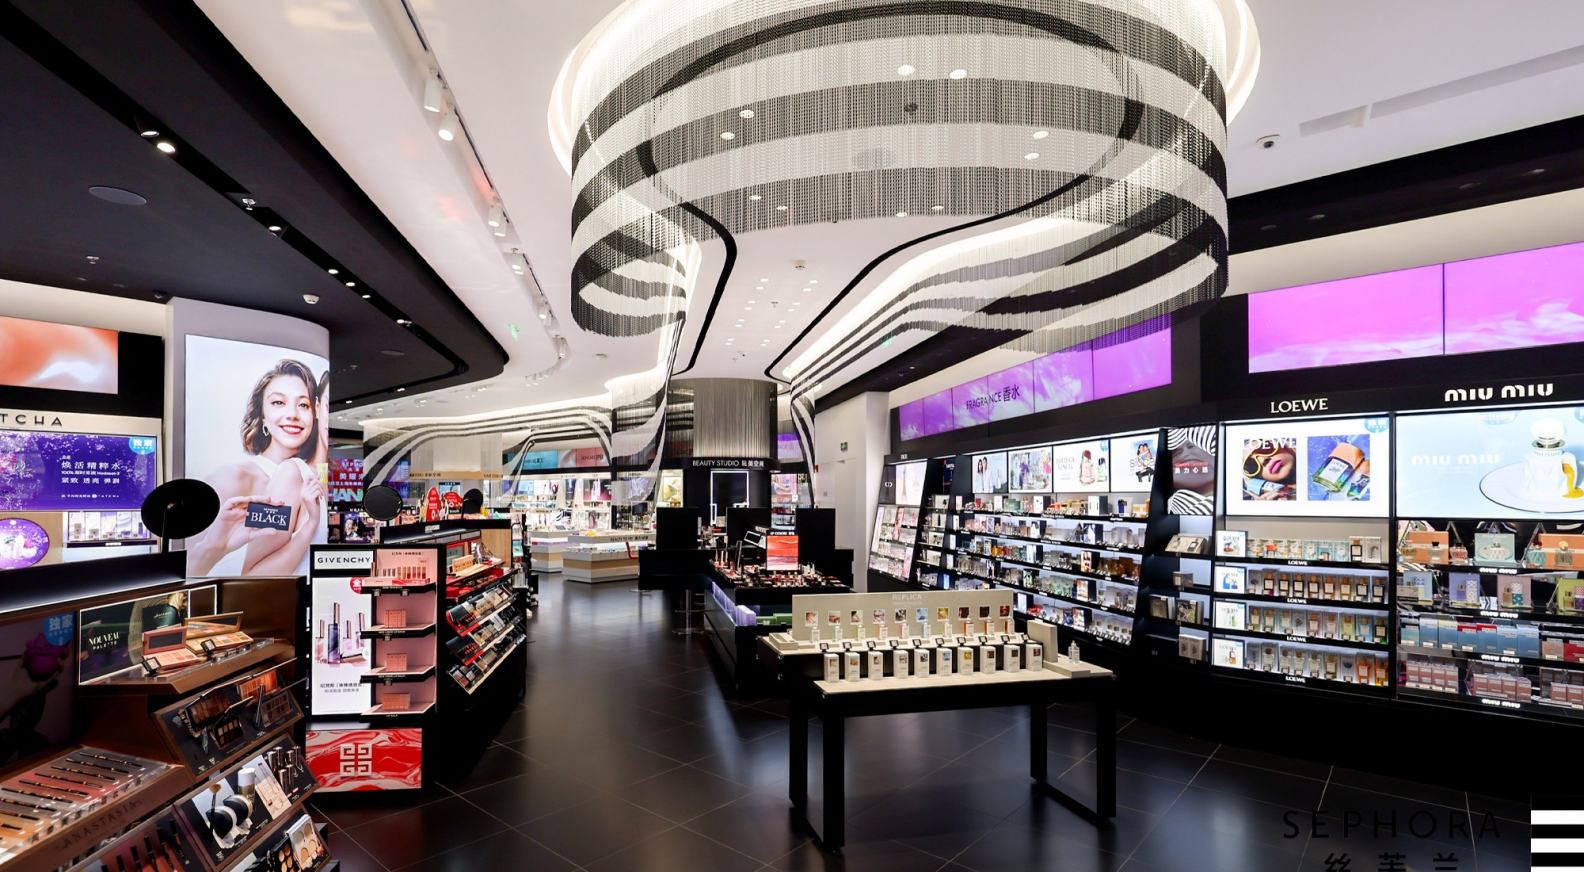 https://r.lvmh-static.com/uploads/2023/07/site-cover-04-sephoras-store-of-the-future-in-shanghai-leverages-advanced-beauty-tech-and-digital-tools-to-present-the-exclusive-7-touchpoints-1584x872.jpg